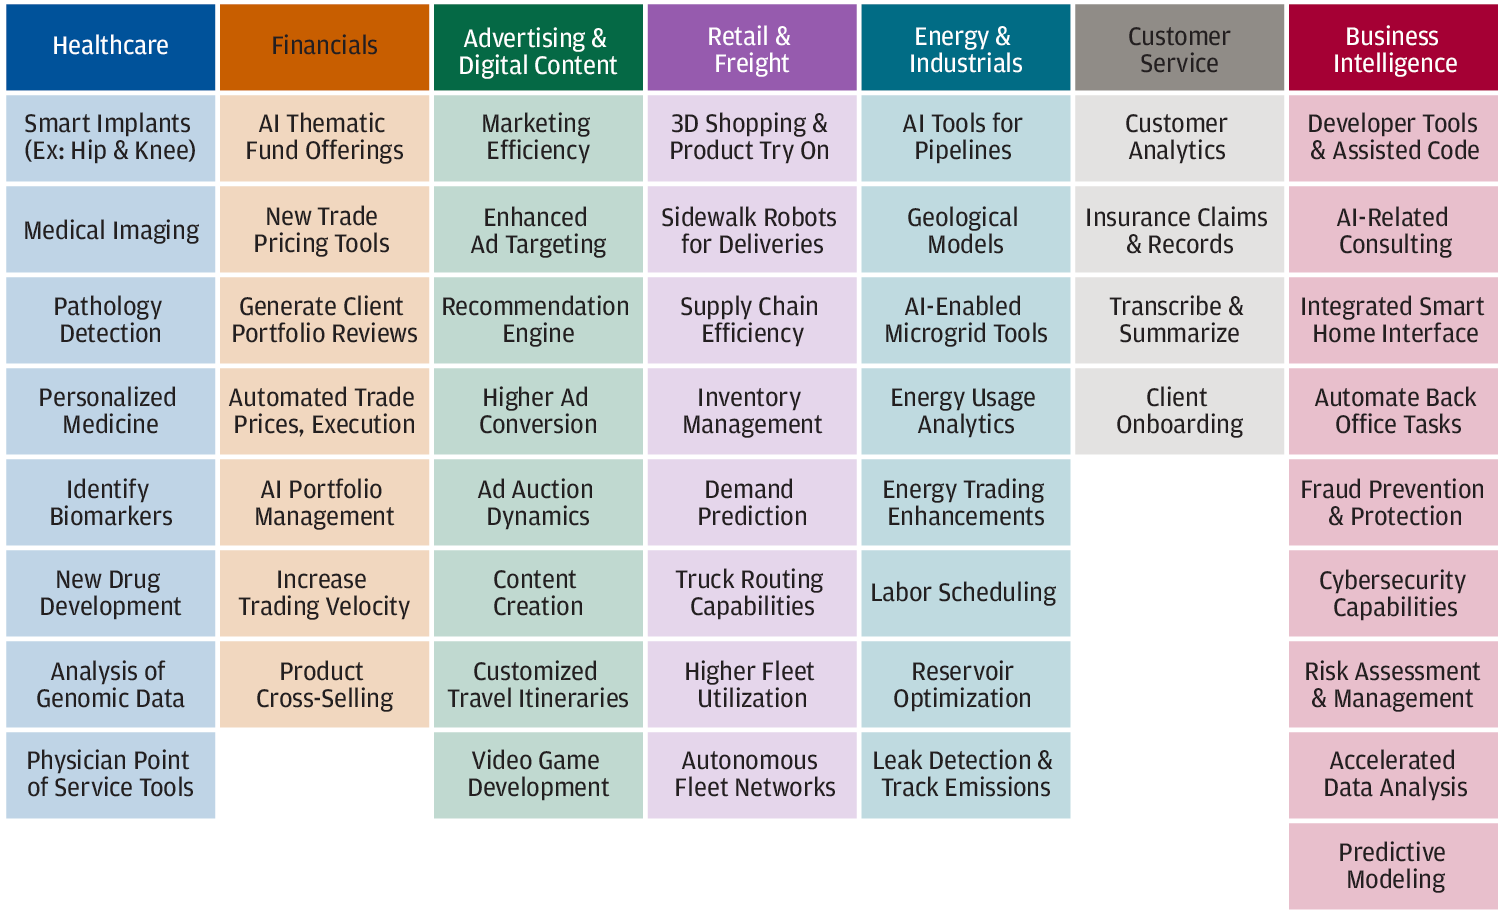 The table describes sector applications of AI in seven sectors, which include healthcare, financials, advertising & digital content, retail & freight, energy & industrials, customer service, and business intelligence. 